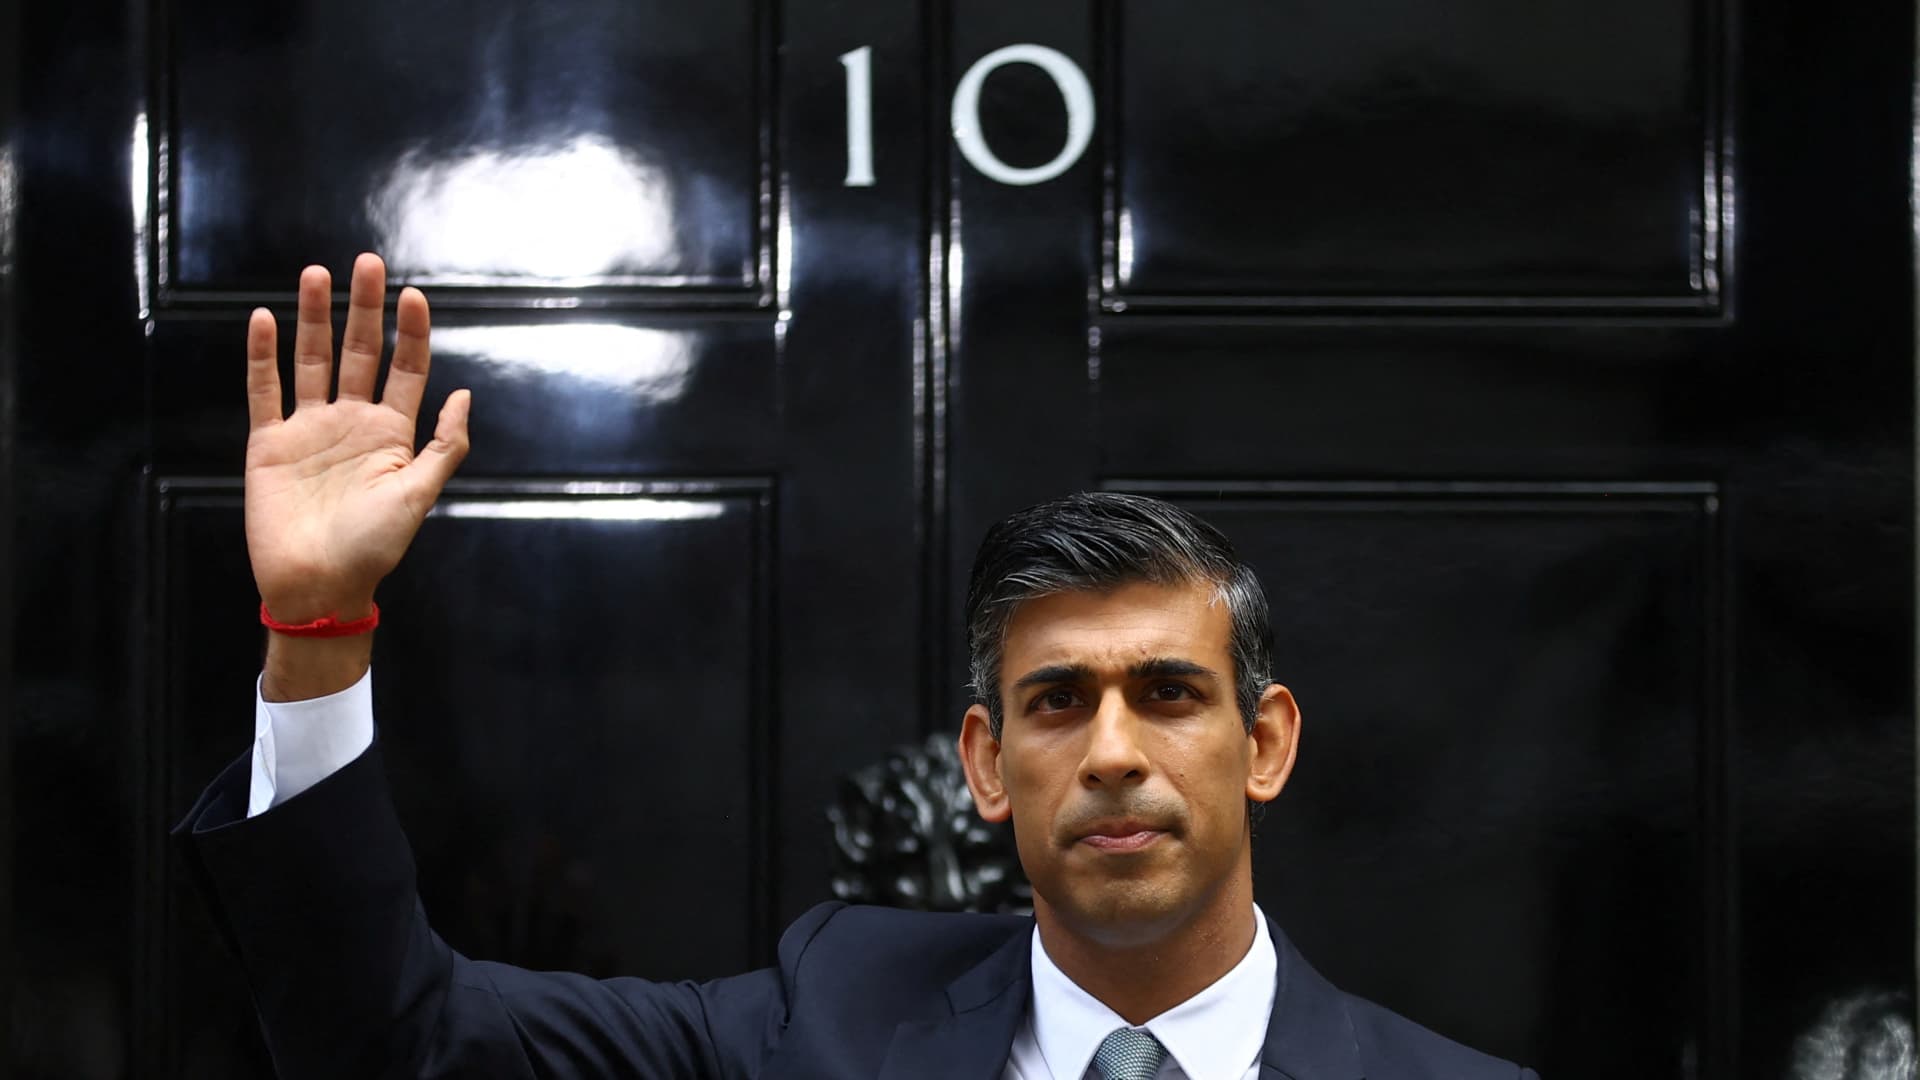 Britain's new Prime Minister Rishi Sunak waves in front of Number 10 Downing Street, in London, Britain, October 25, 2022.